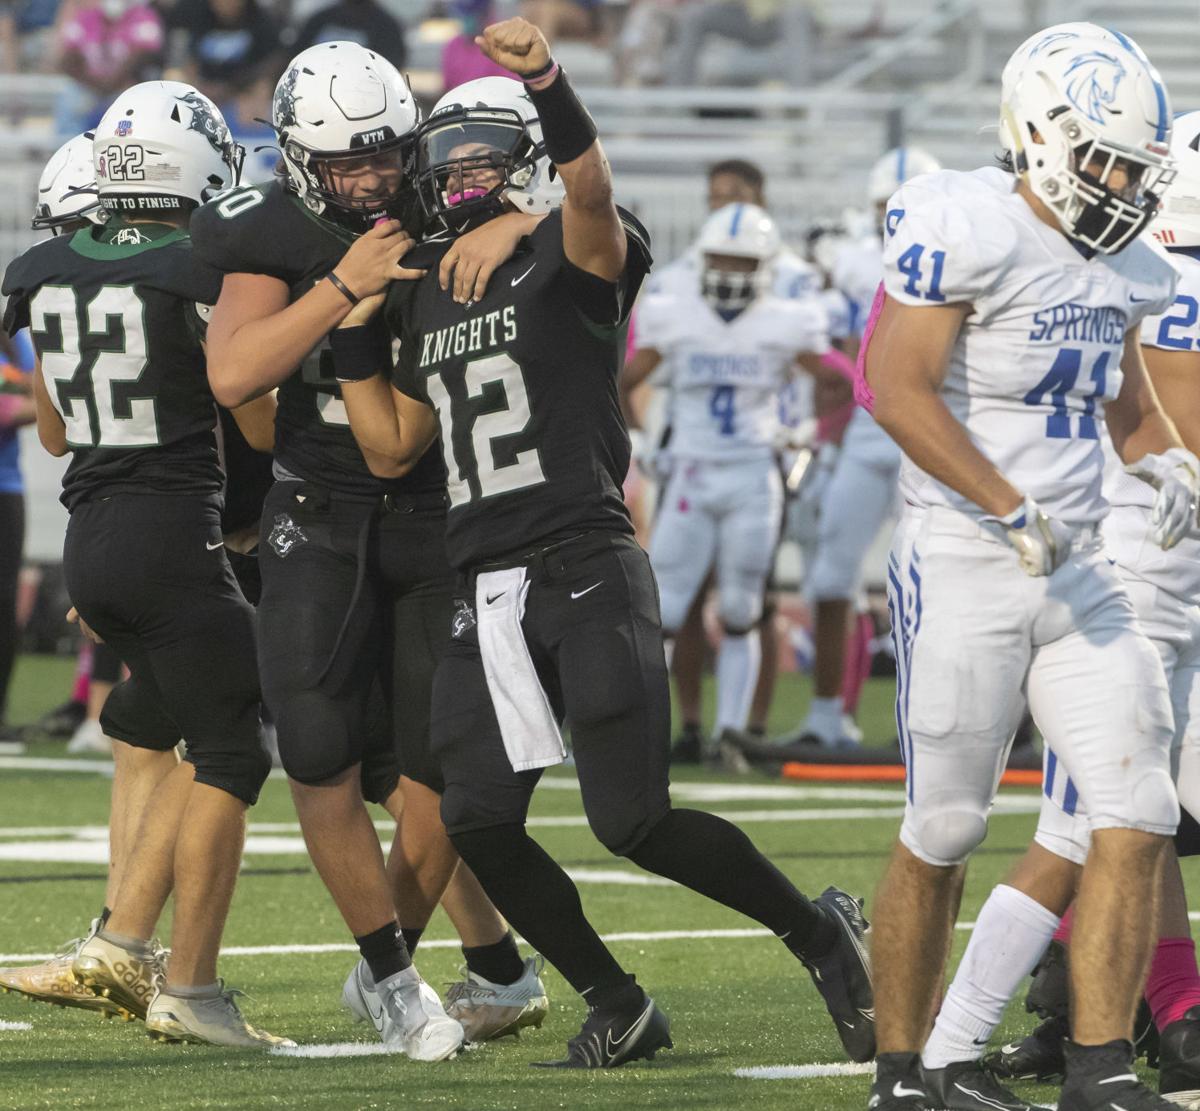 Clear Springs gets past Clear Falls in hard fought contest High